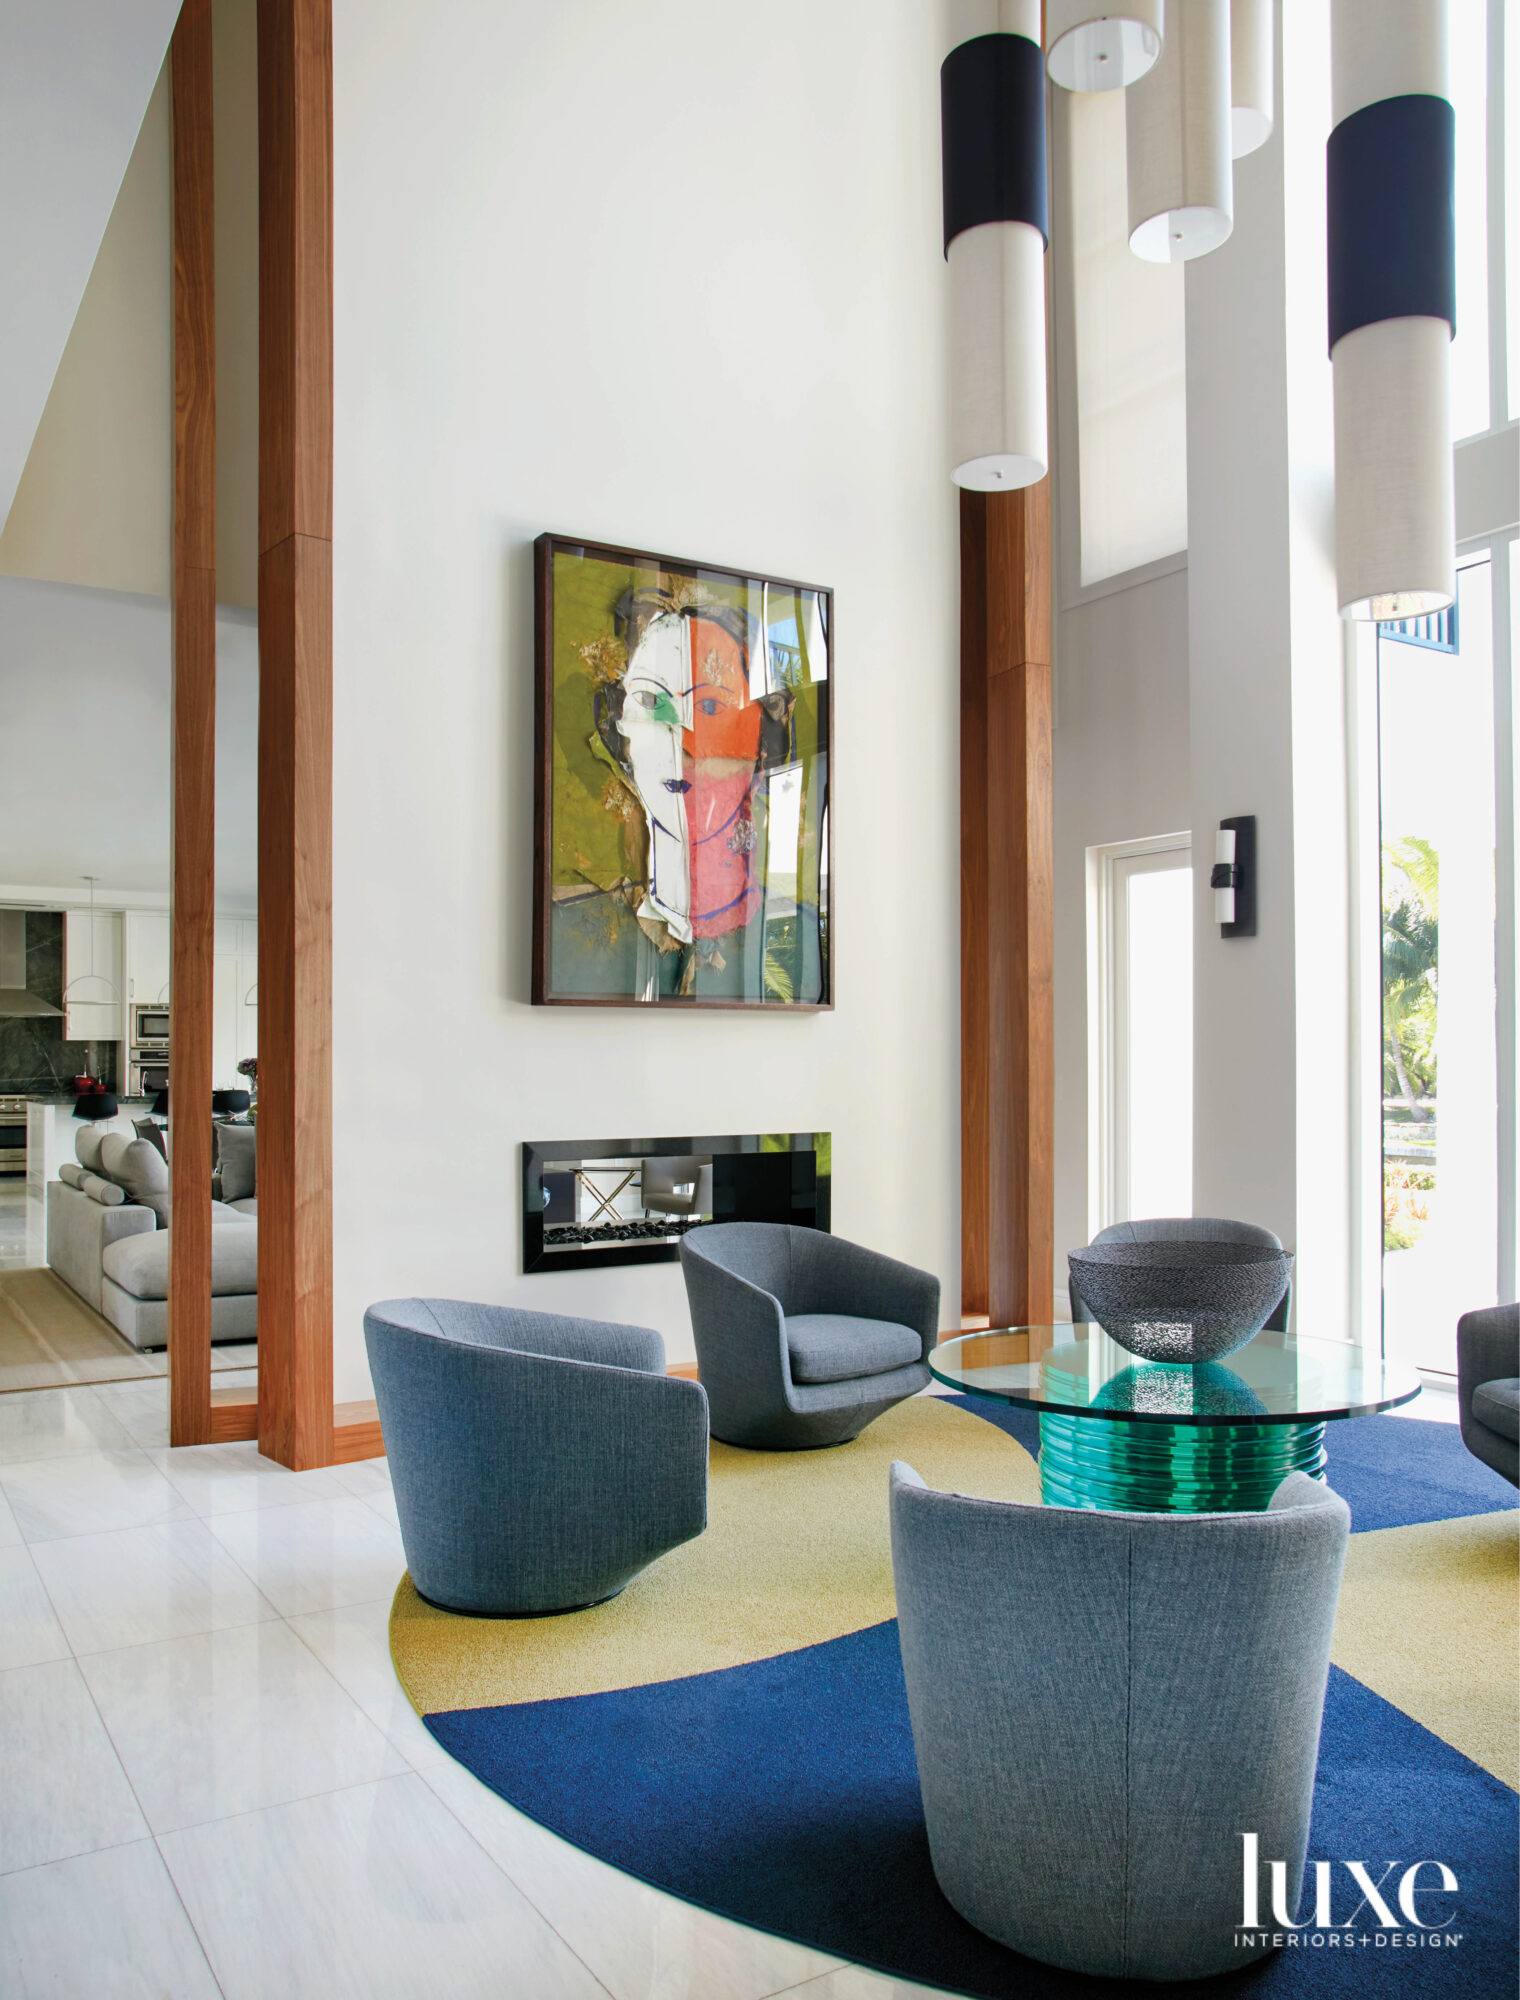 seating area with circular rug, six armchairs and colorful artwork